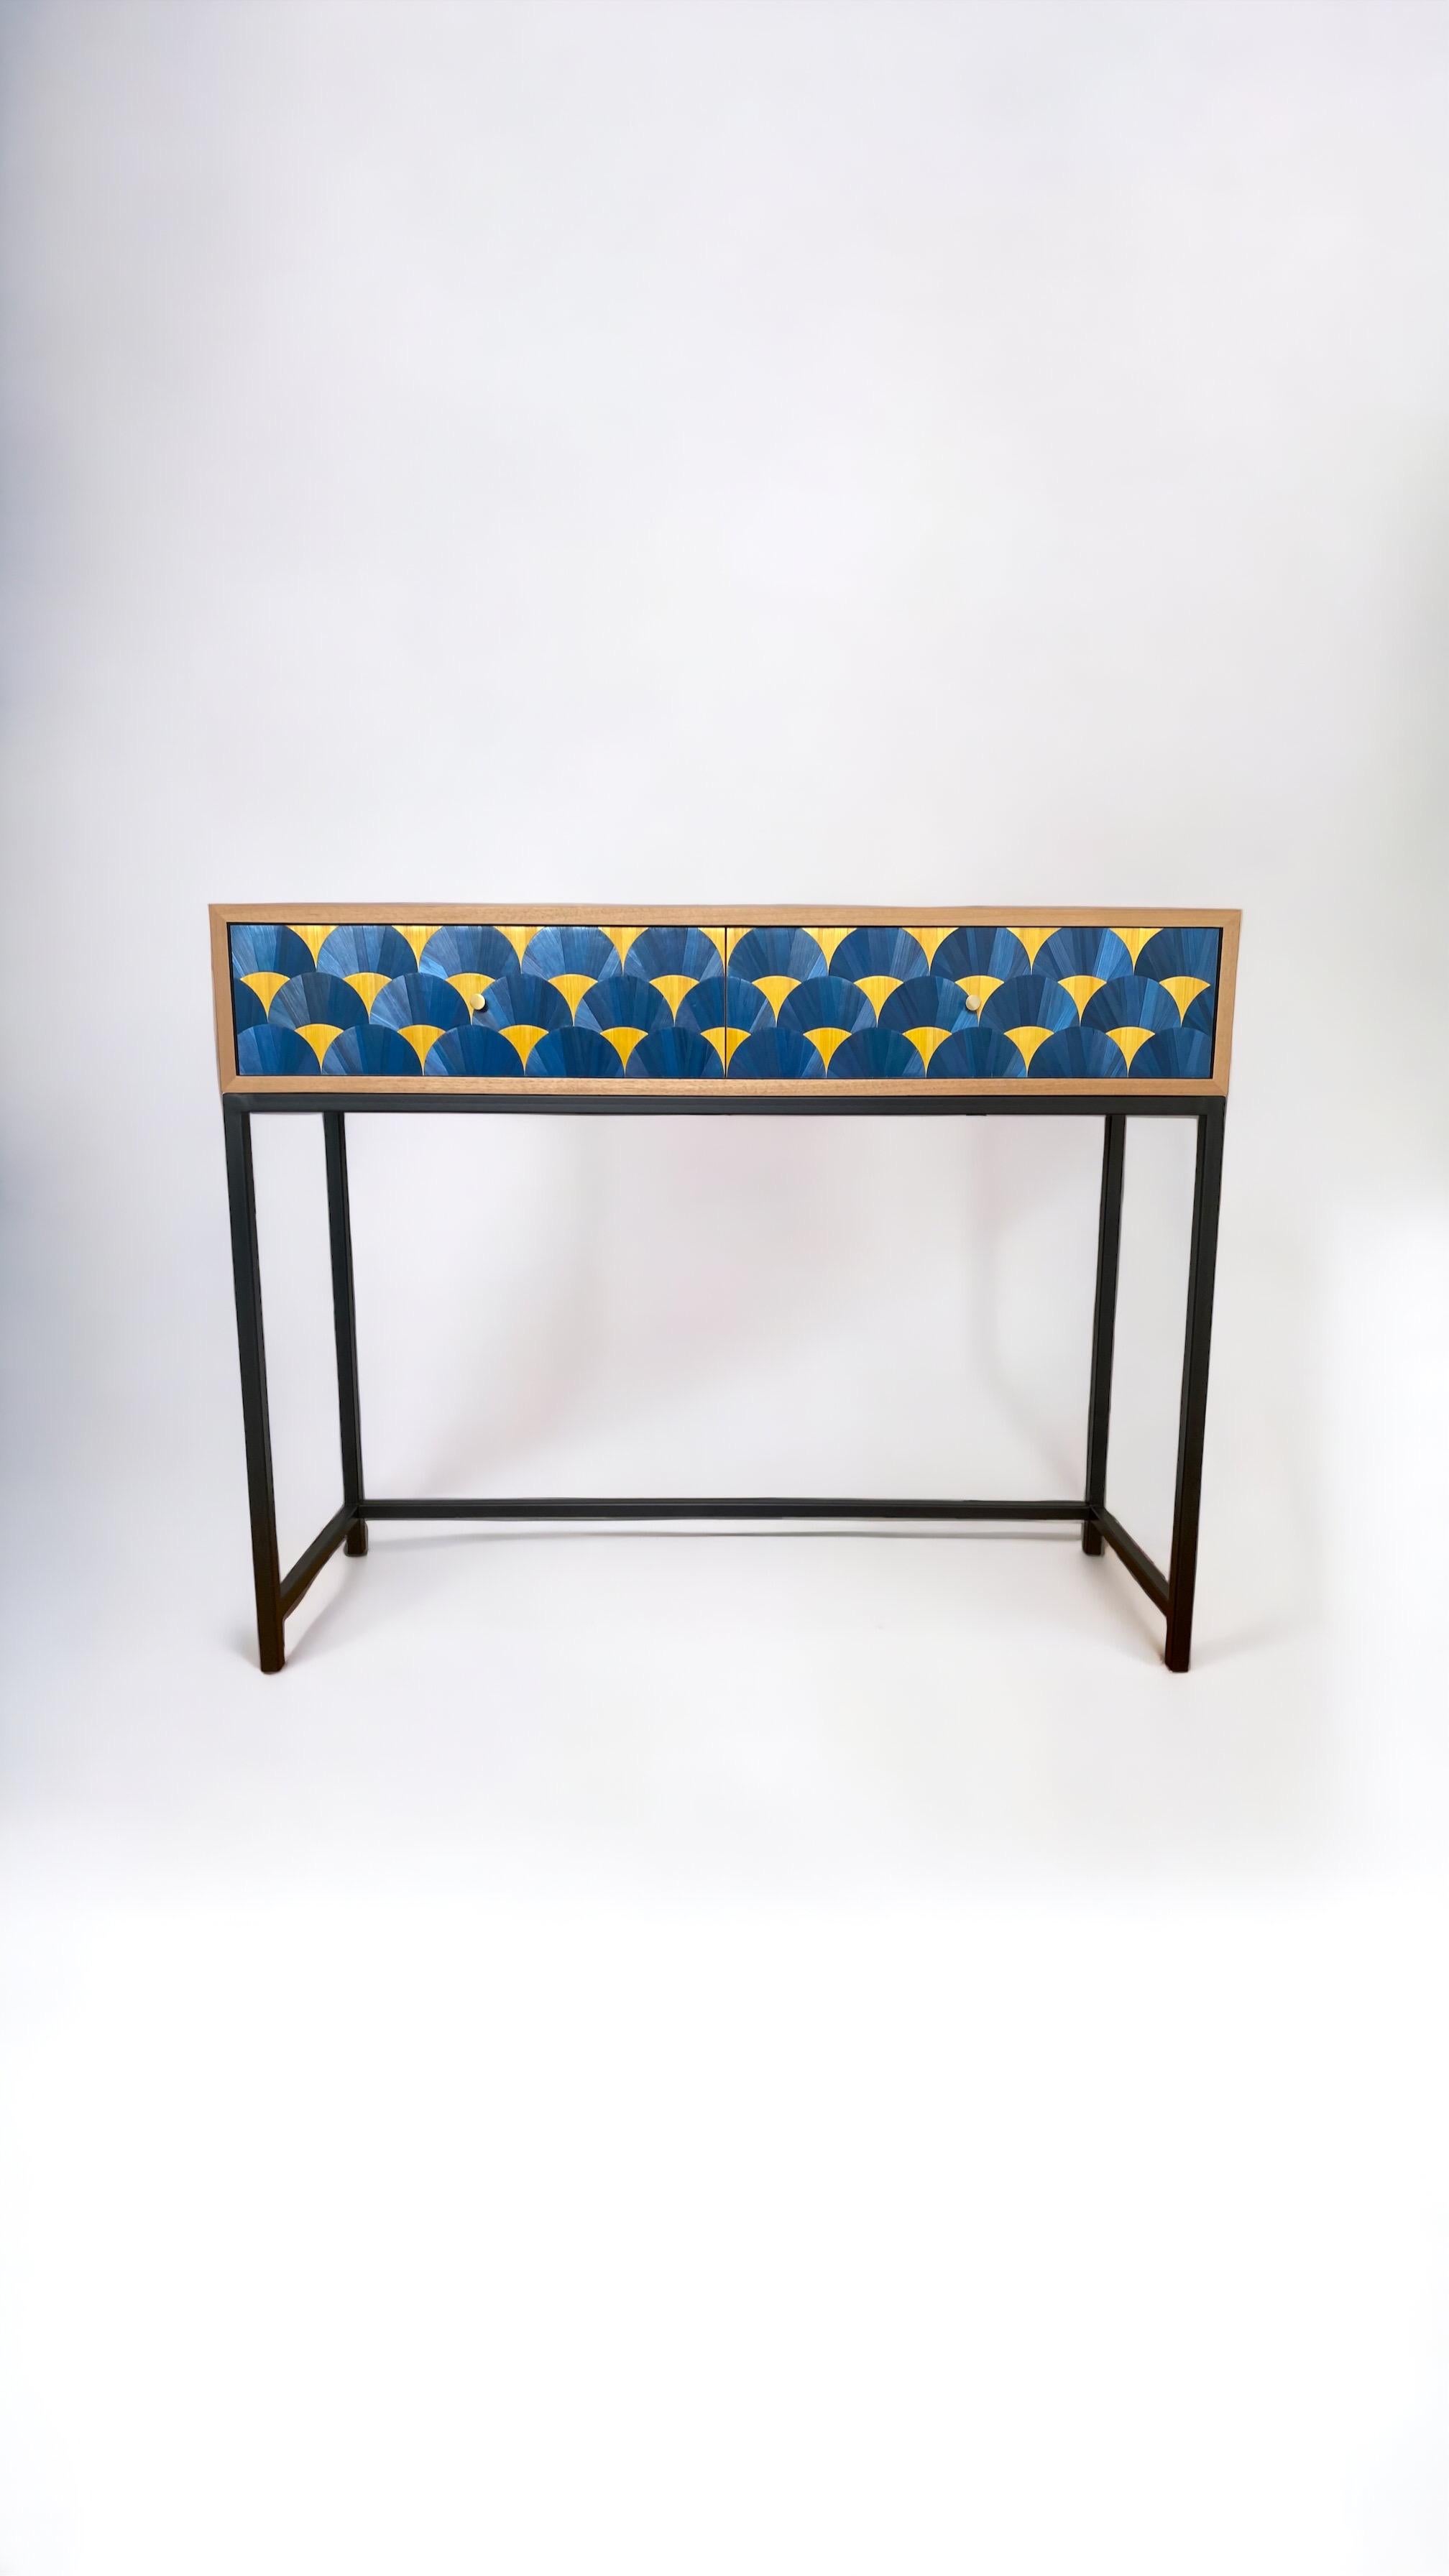 2-drawer console with fronts in straw marquetry, art deco pattern

Walnut tray. The 2 sides of the box have been inlaid with rye straw naturally dyed with blue pigments.
The 2 drawers are entirely in walnut for a perfect finish.
They are mounted on